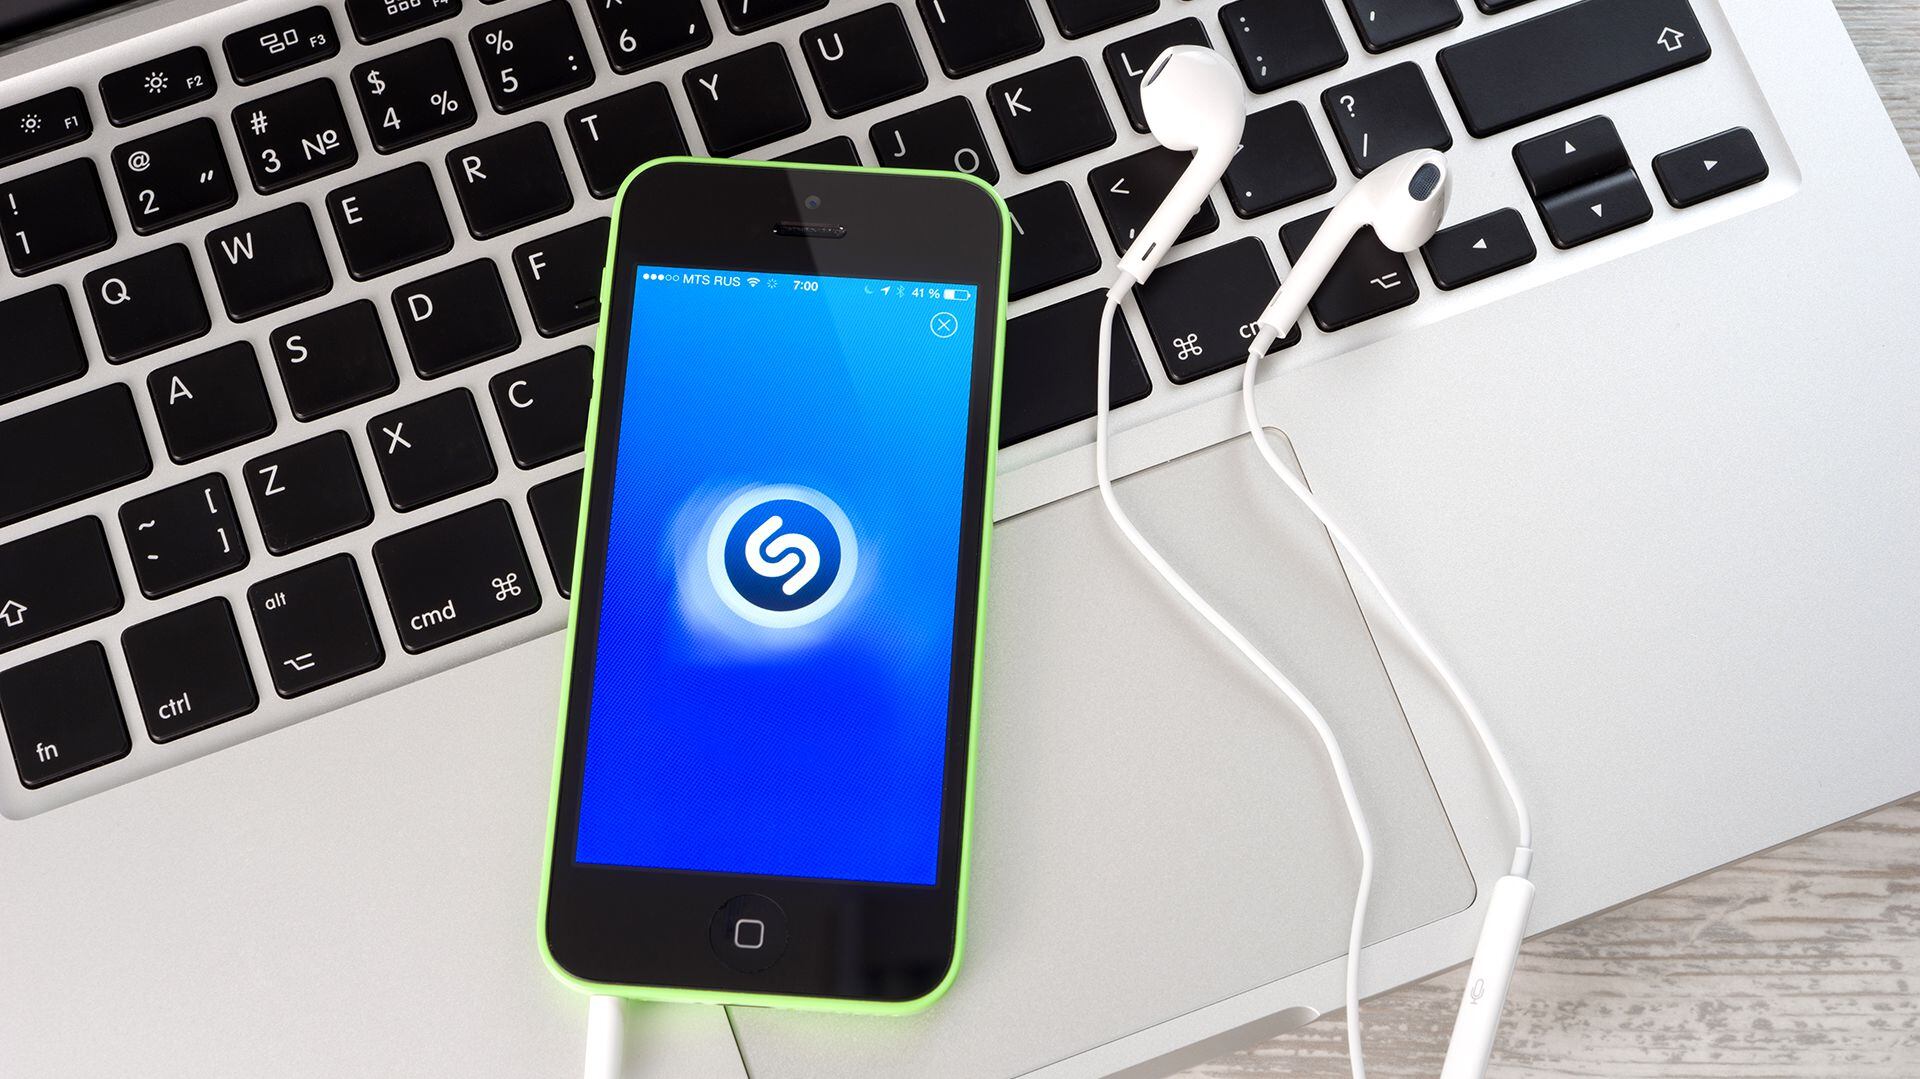 Shazam Introduces New Feature To Identify Music In Apps While Wearing Headphones